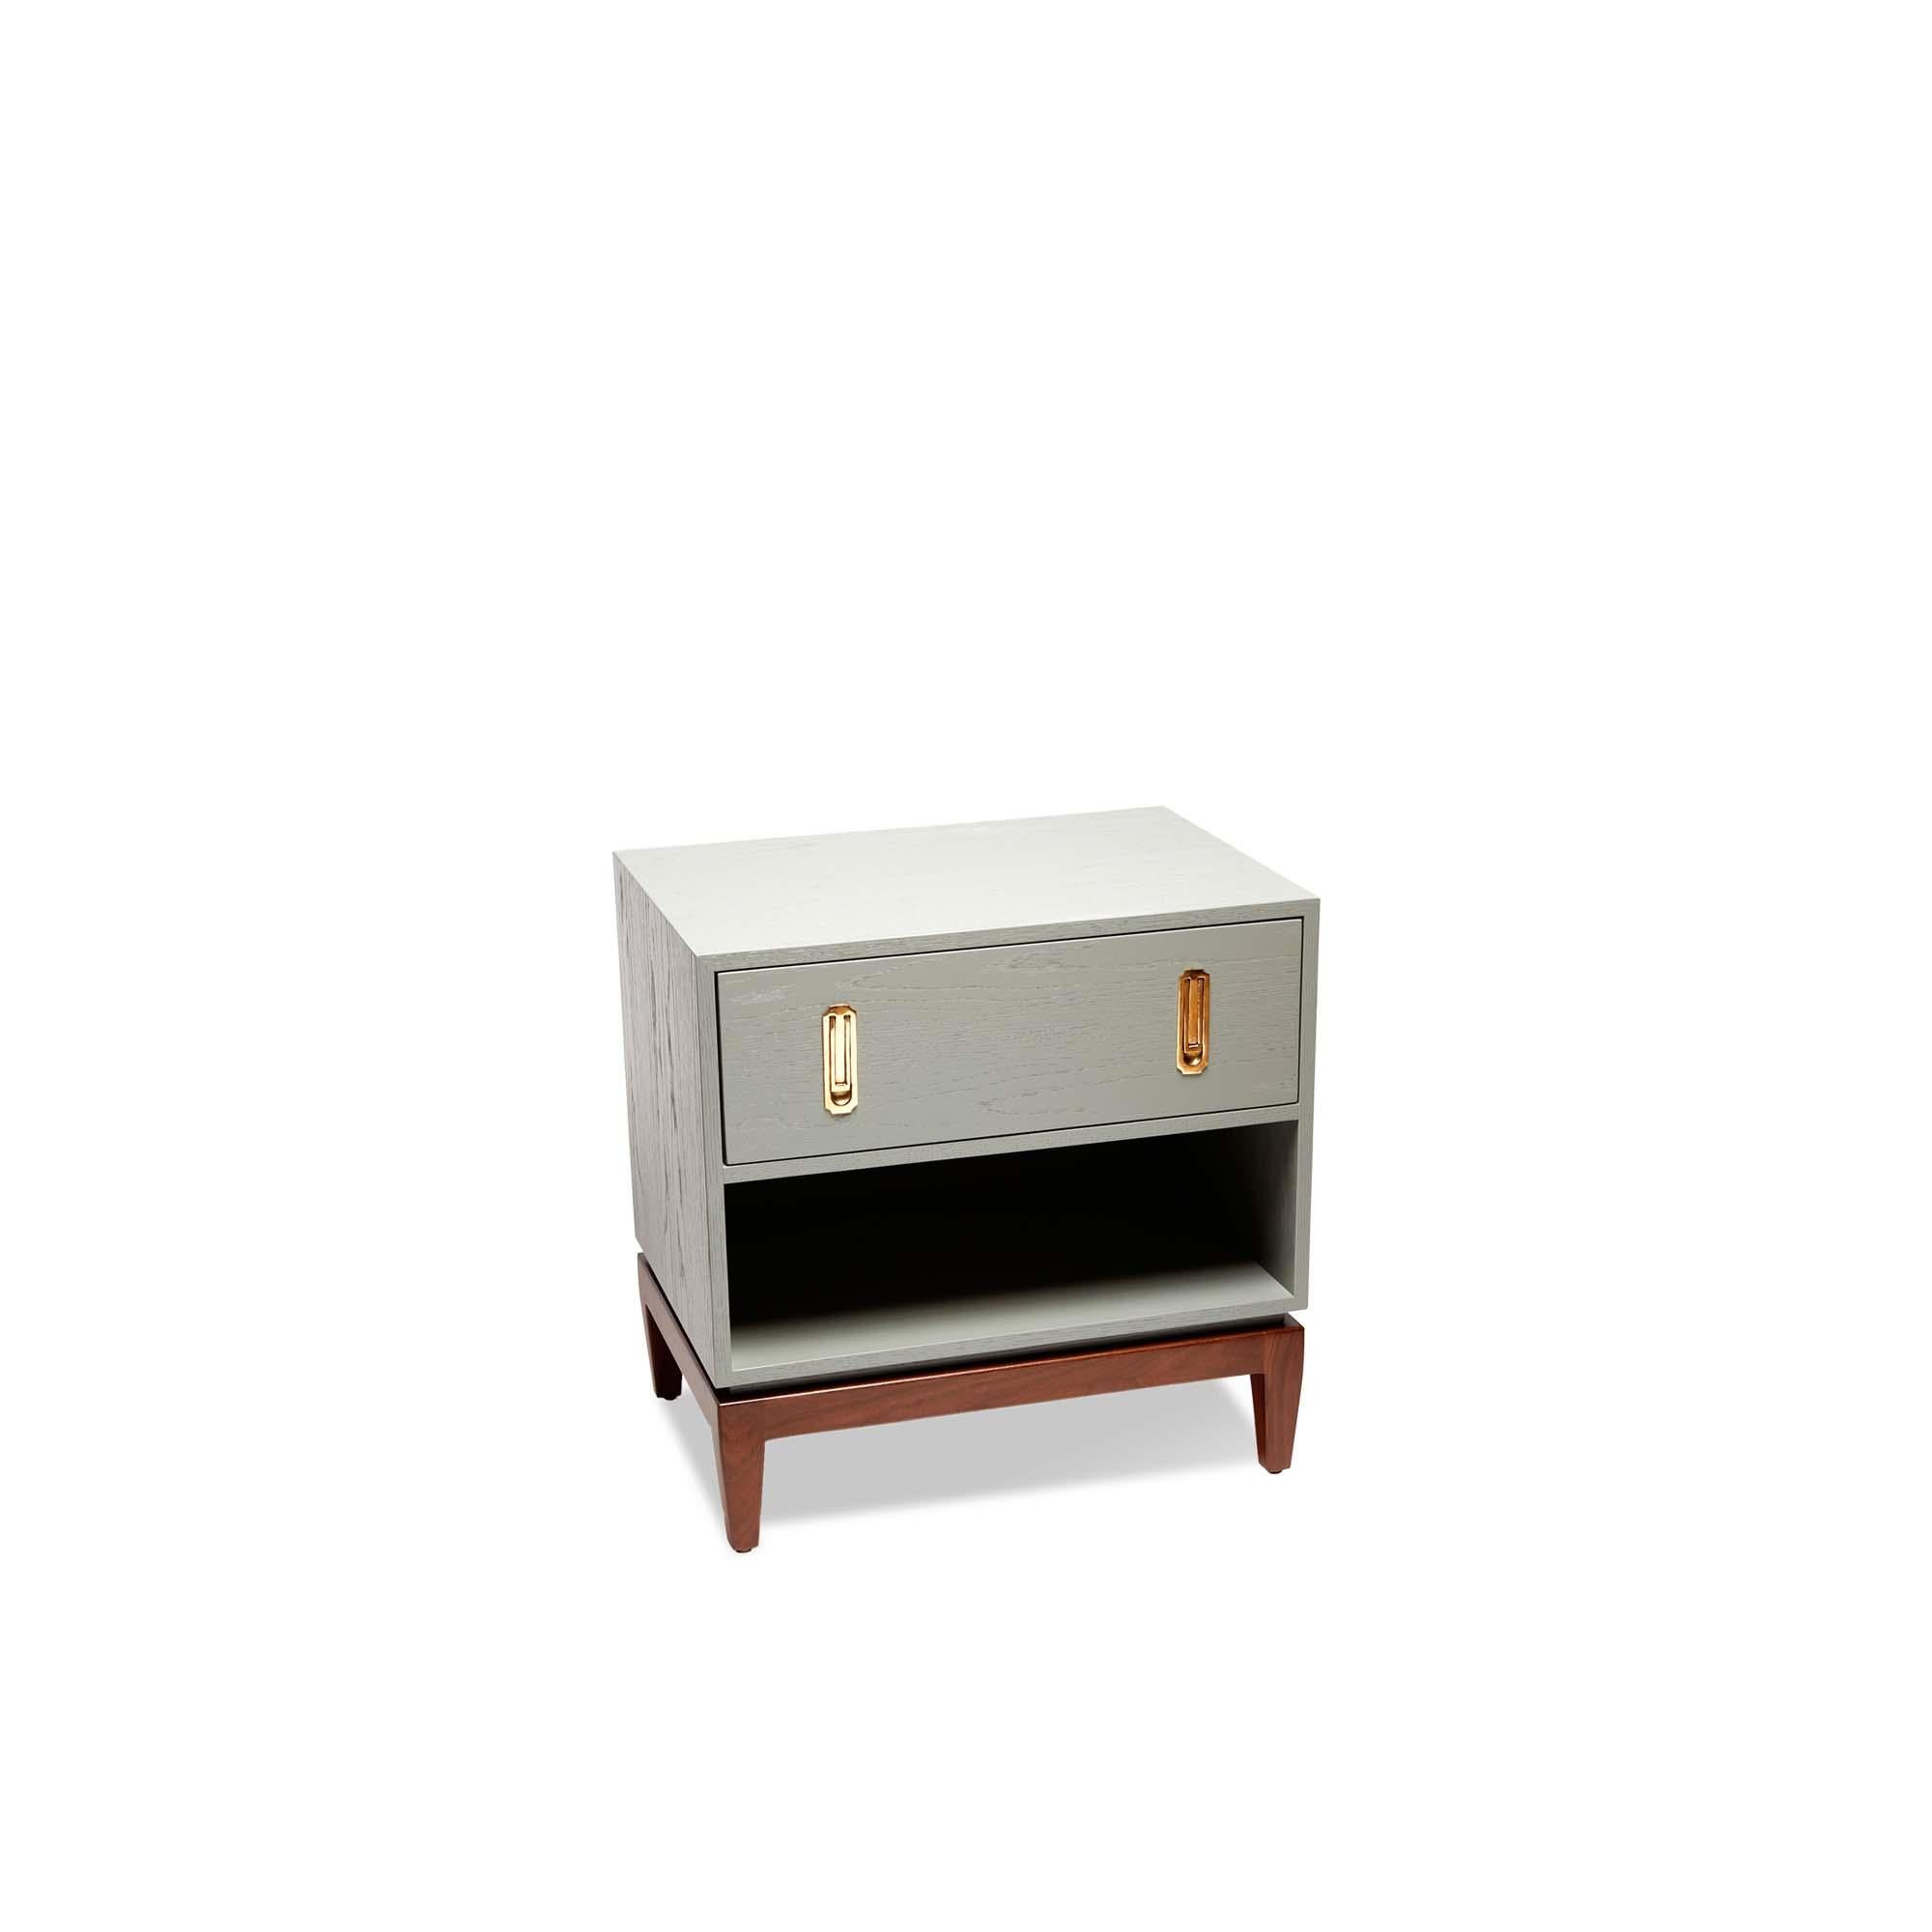 The Arcadia side table features one or two drawers, an open shelf, hand crafted vintage style hardware and a sculptural solid American walnut or white oak base.

The Lawson-Fenning Collection is designed and handmade in Los Angeles, California.